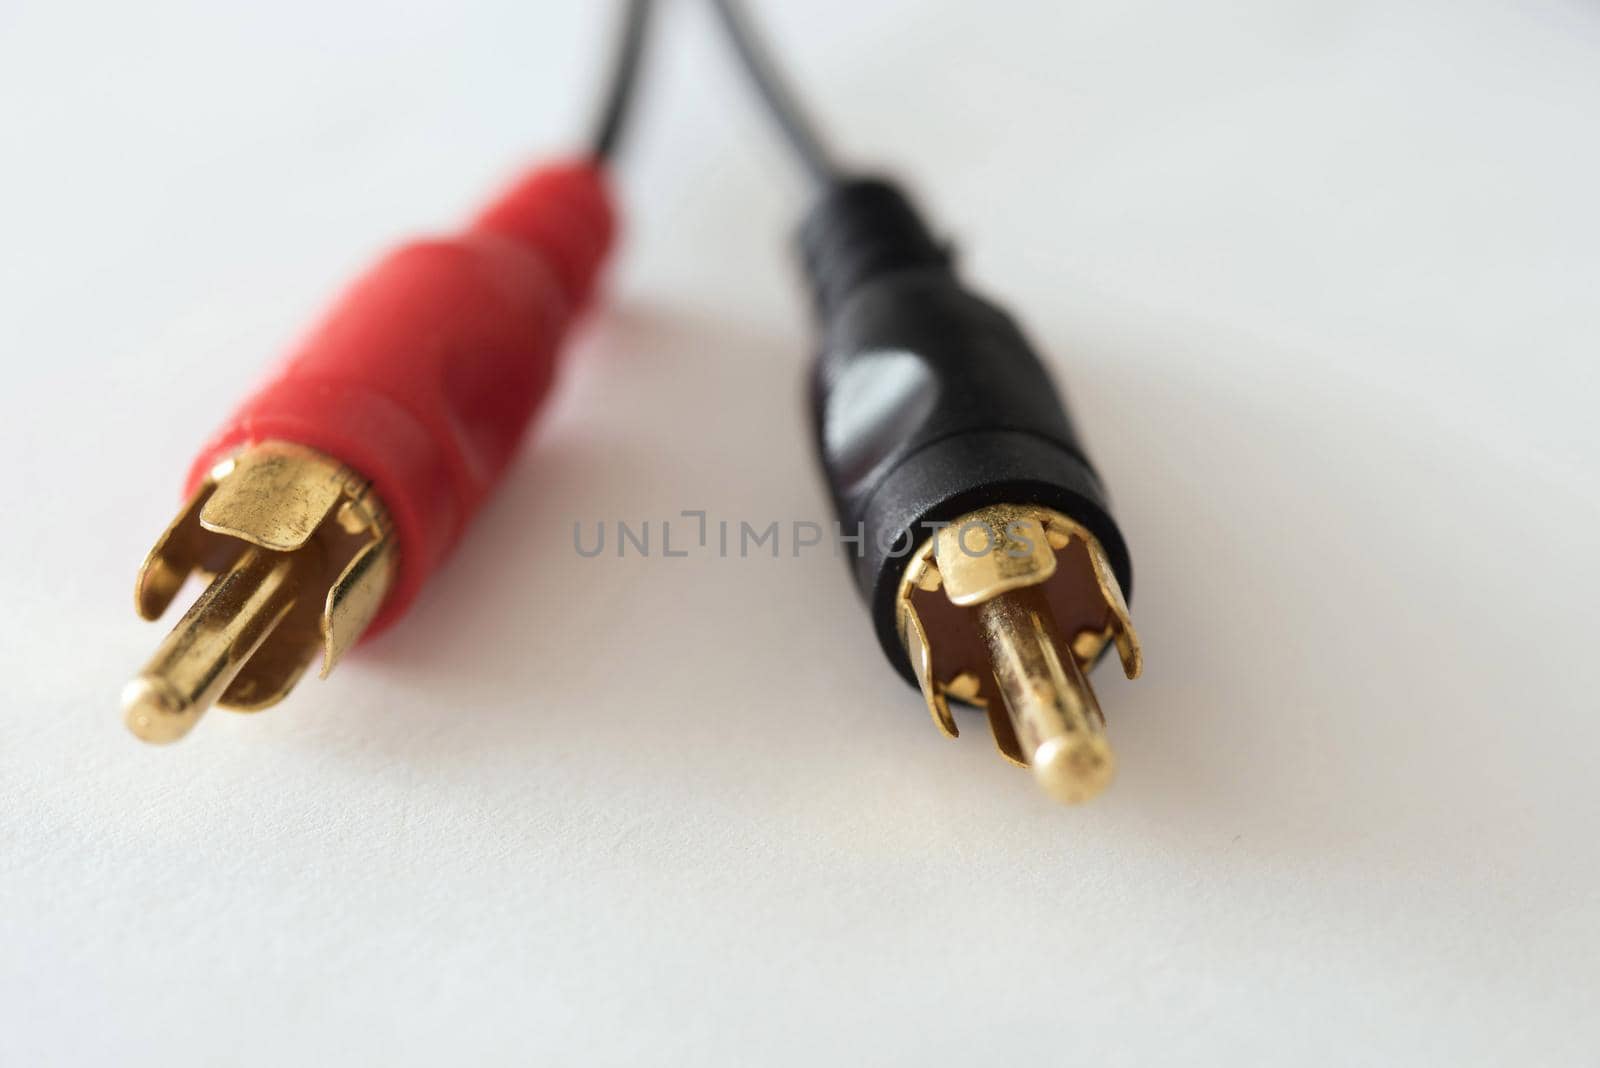 Gold plated connectors in close-up view against white background